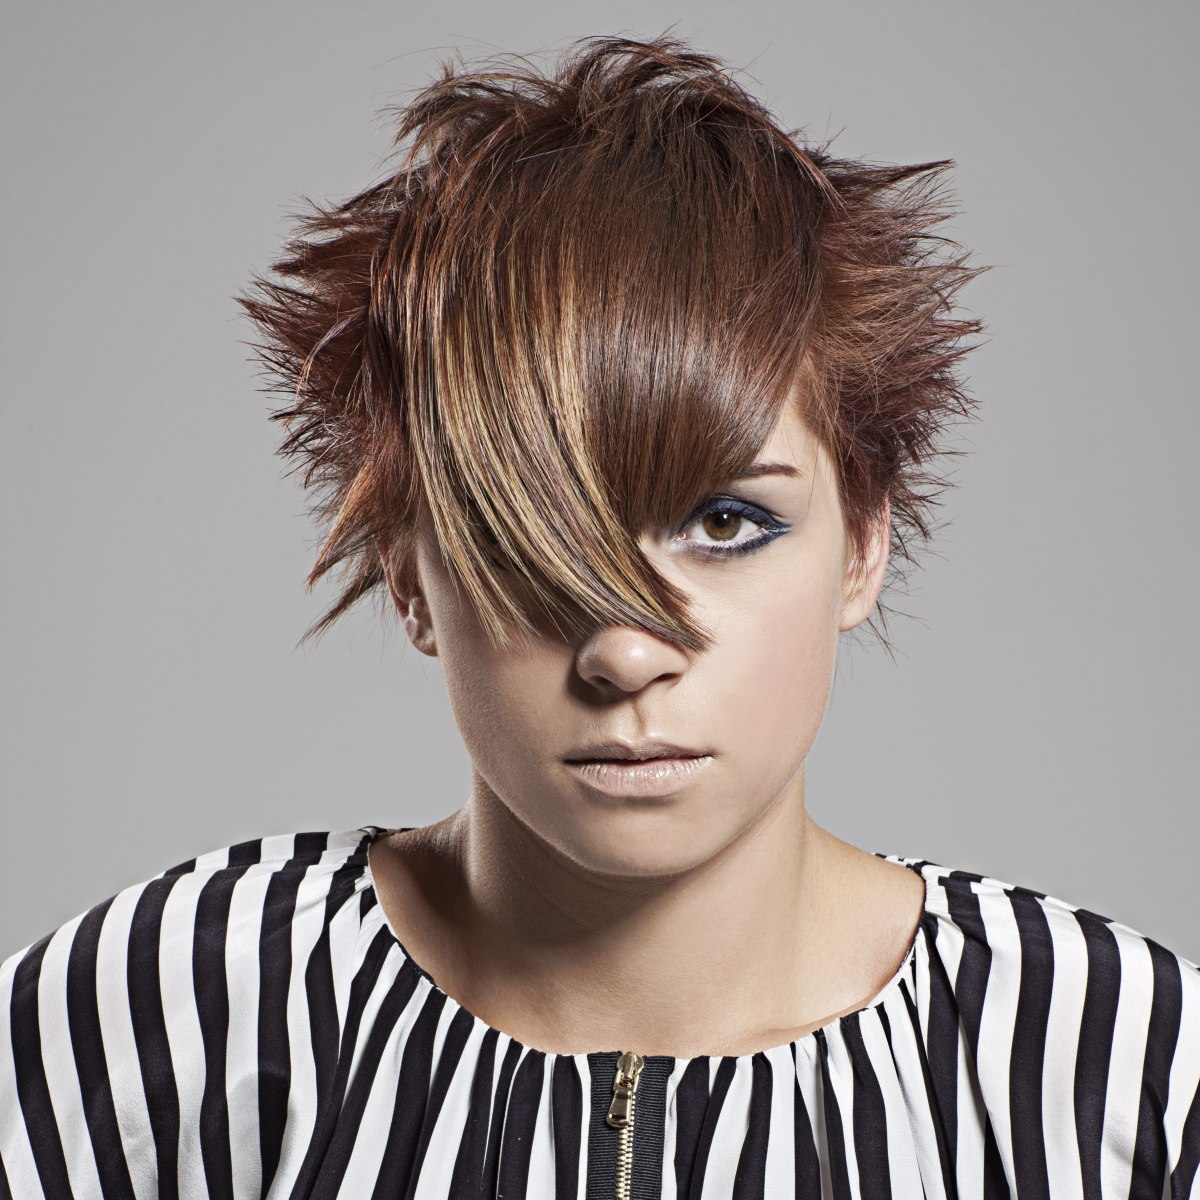 23 Fun Spiky Pixie Cuts to Freshen Up Your Look